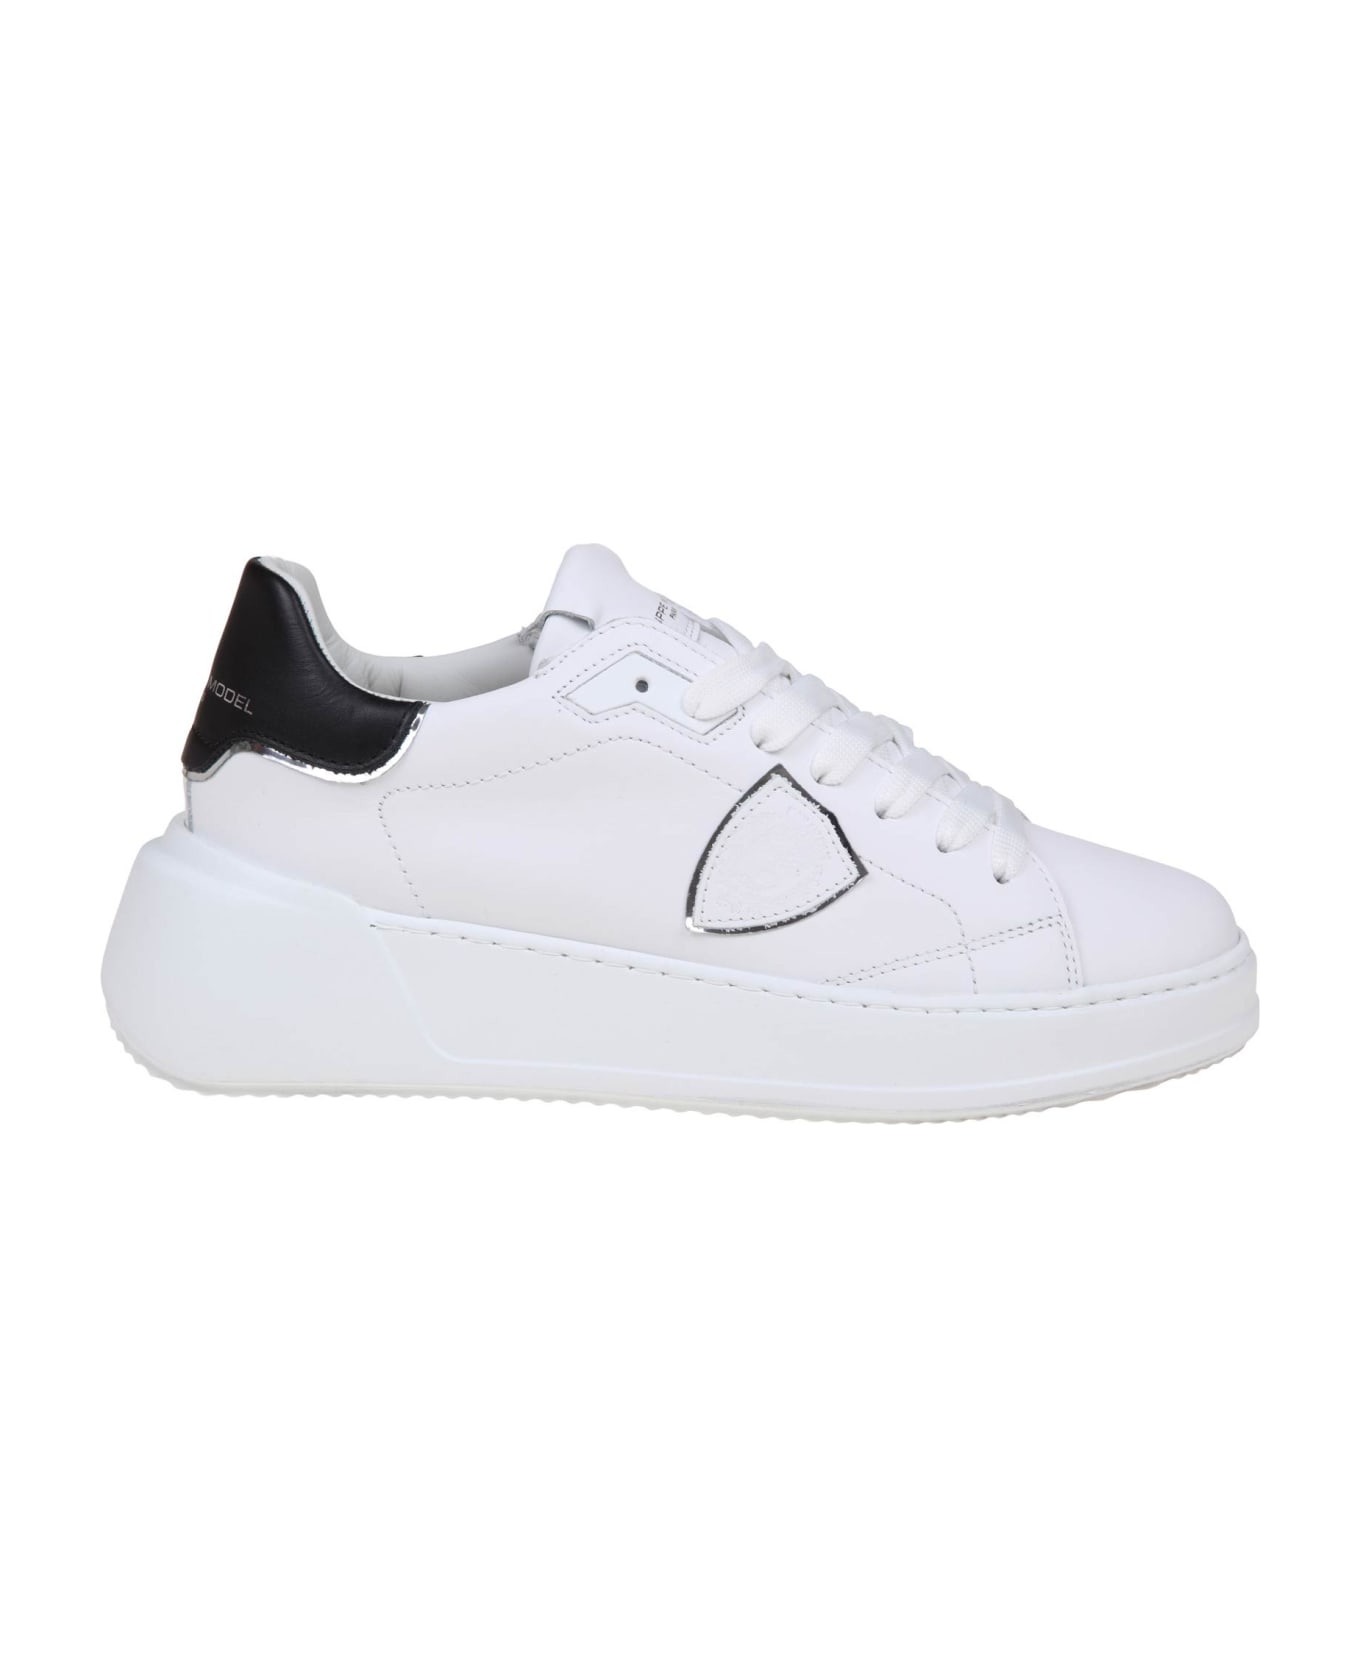 Philippe Model Tres Temple Low In Black And White Leather - White/Black